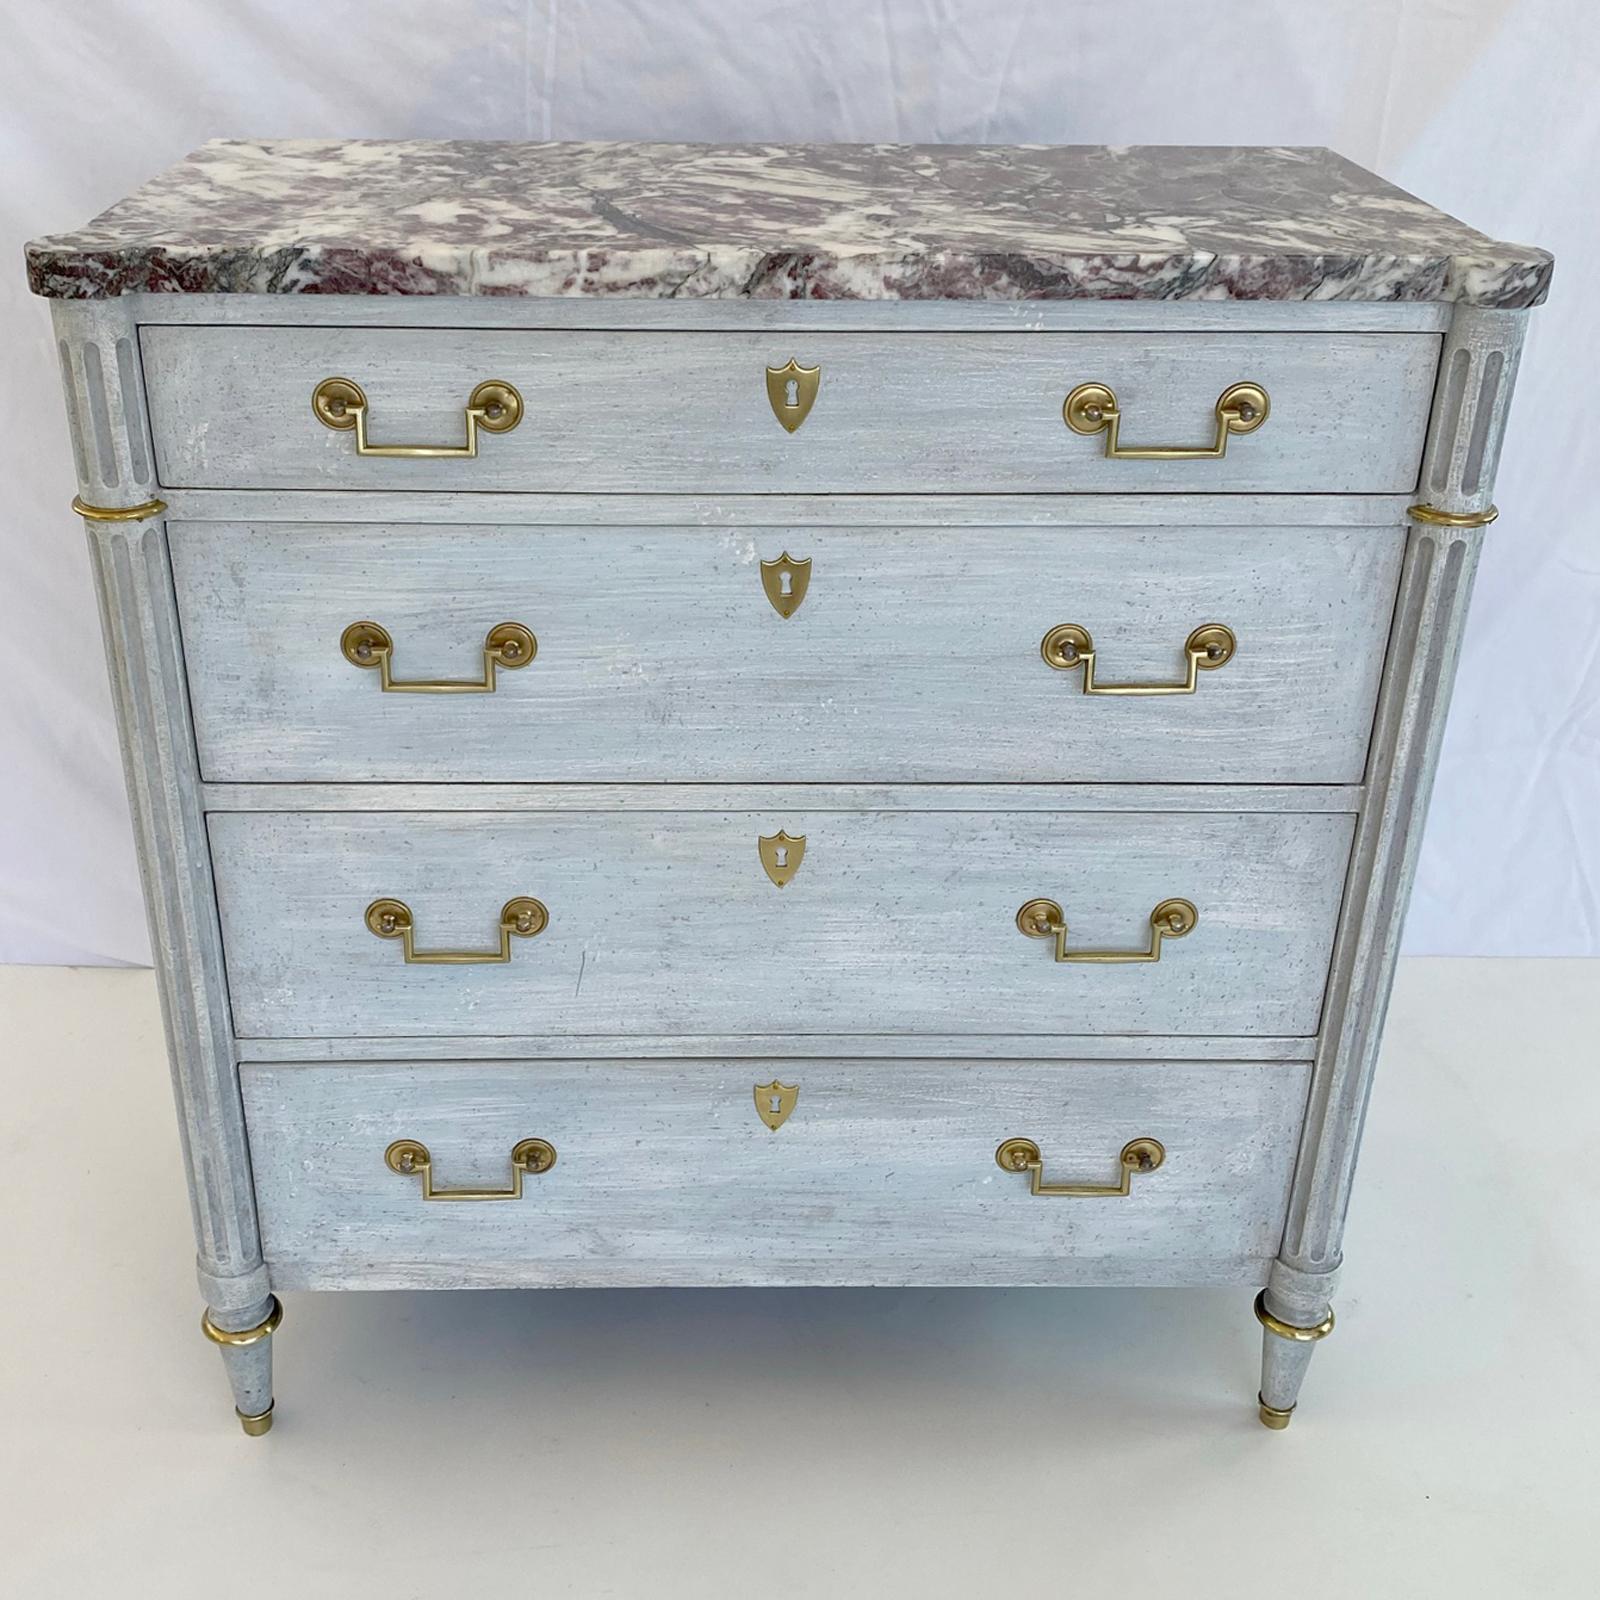 Narrow, Neoclassical style, painted hall chest, by Baker; having a painted finish, its rectangular top of rouge marble with rounded corners, on conforming base, its fluted stiles flank four stacked drawers, each with bracket handles, centered by